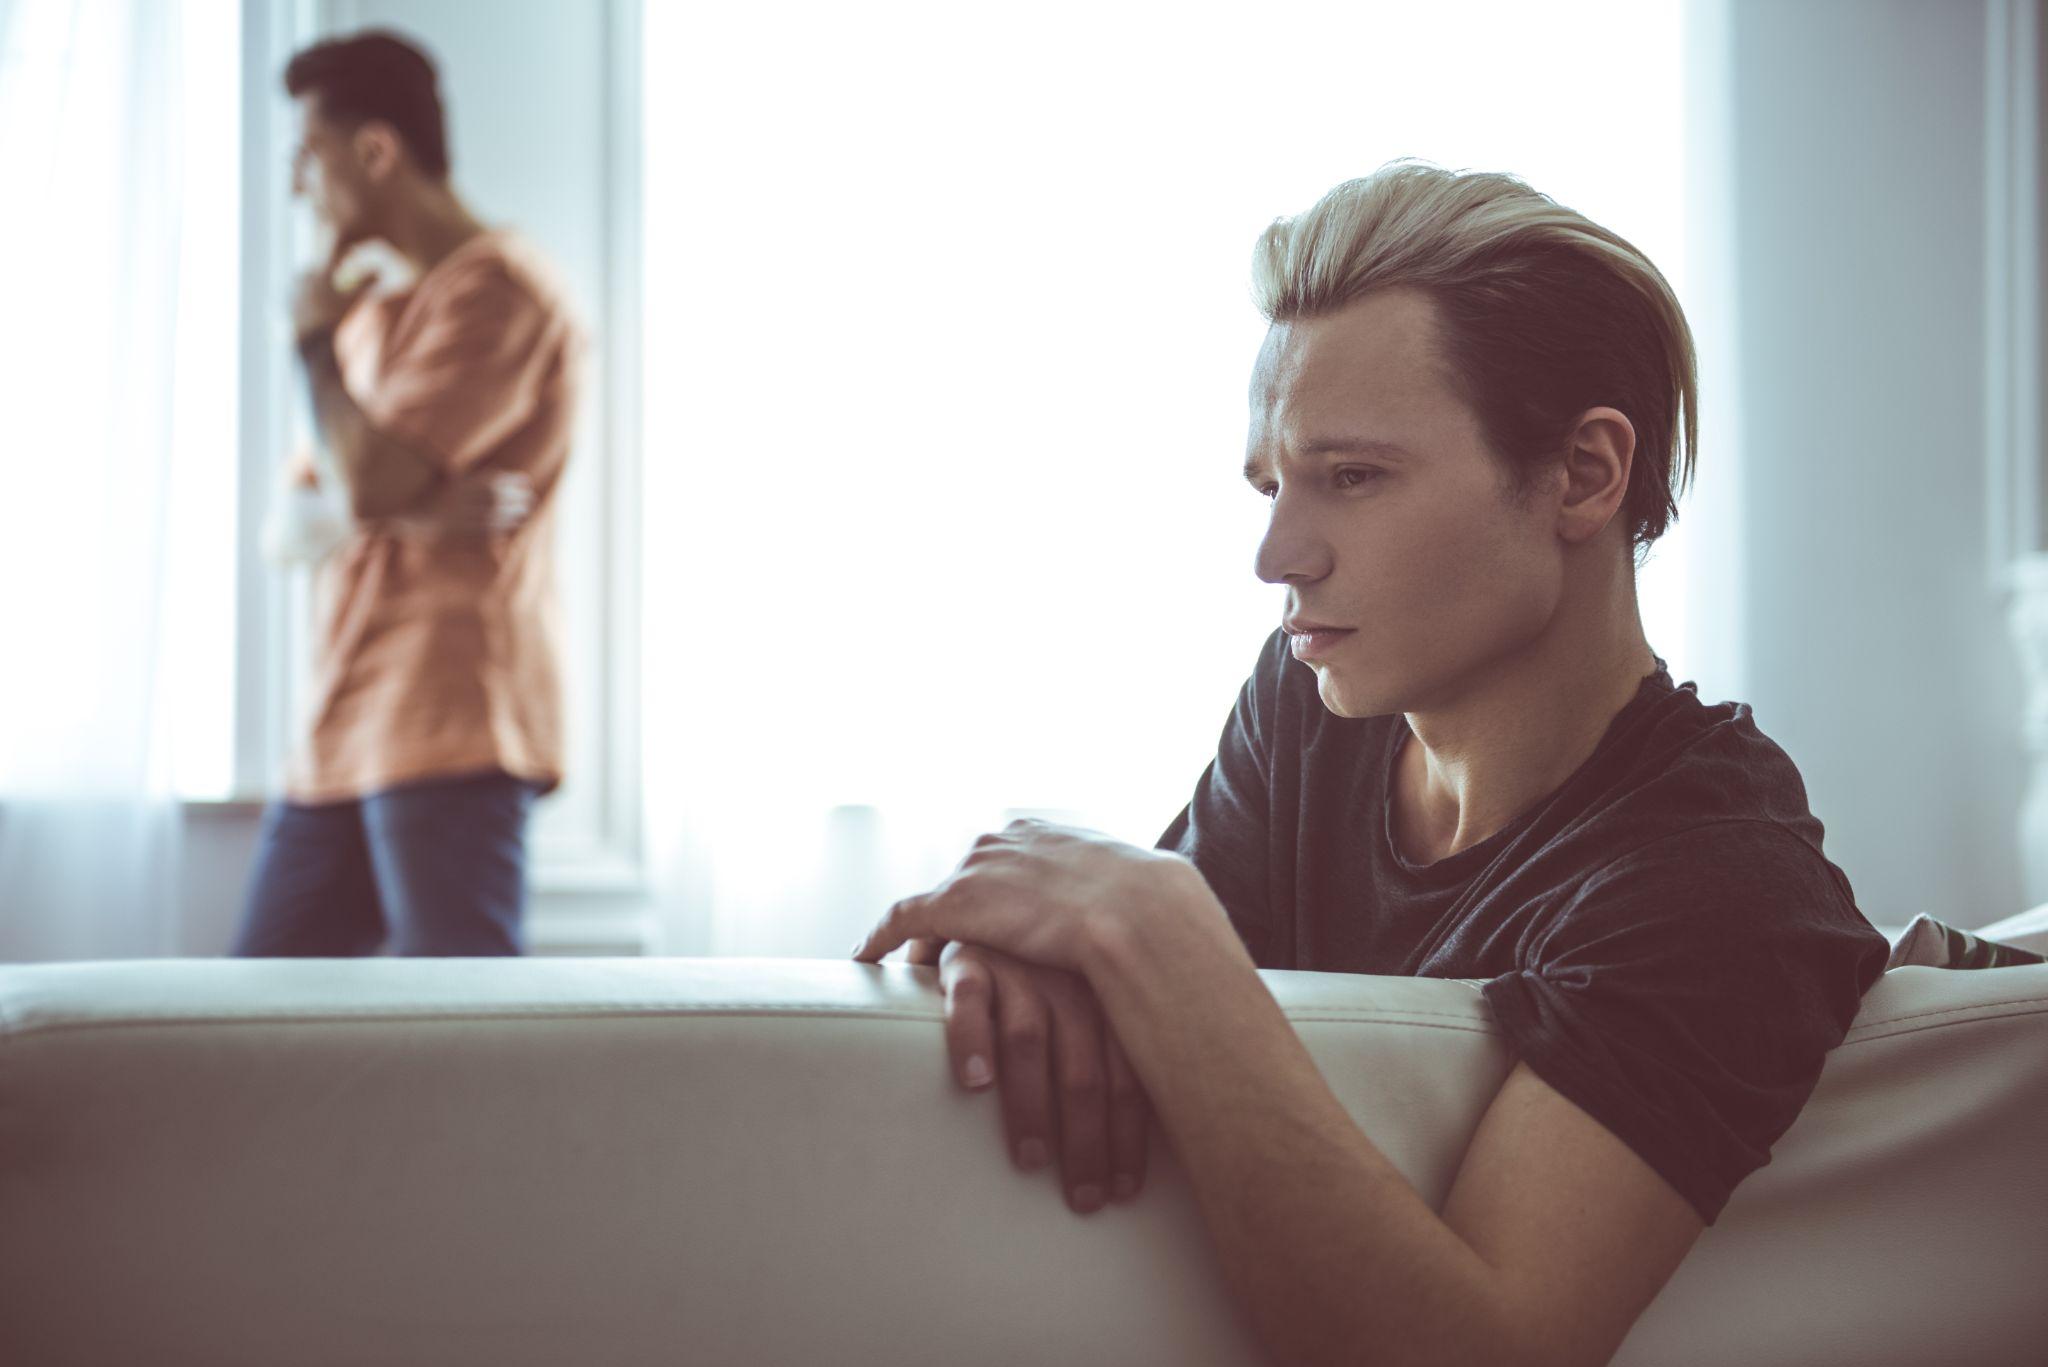 Sad guy with dyed hair sitting on couch while his boyfriend standing near window on blurred